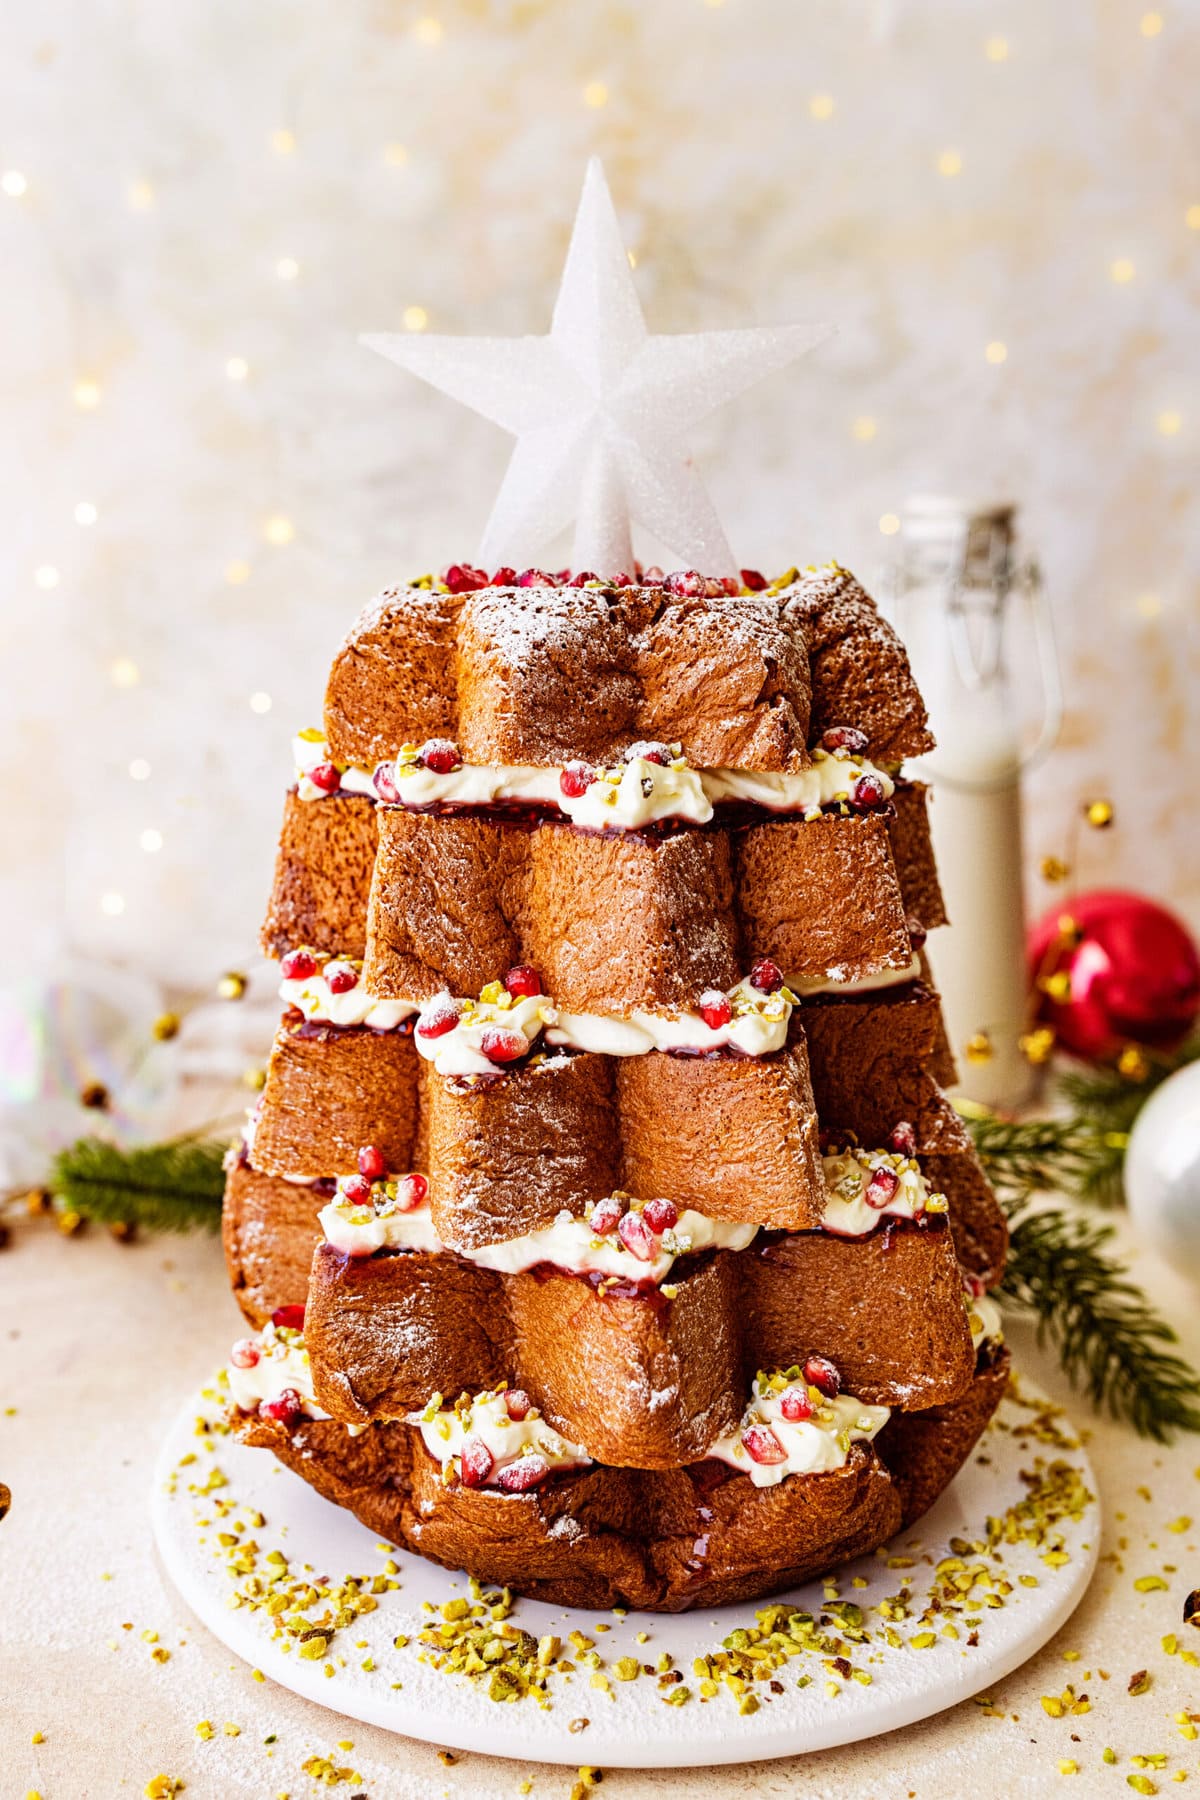 Pandoro Christmas Tree Cake (Italian Christmas Cake)- finished cake decorated with pomegranate seeds and a beautiful white star on top. Christmas. White snowkflake decorations in background.  